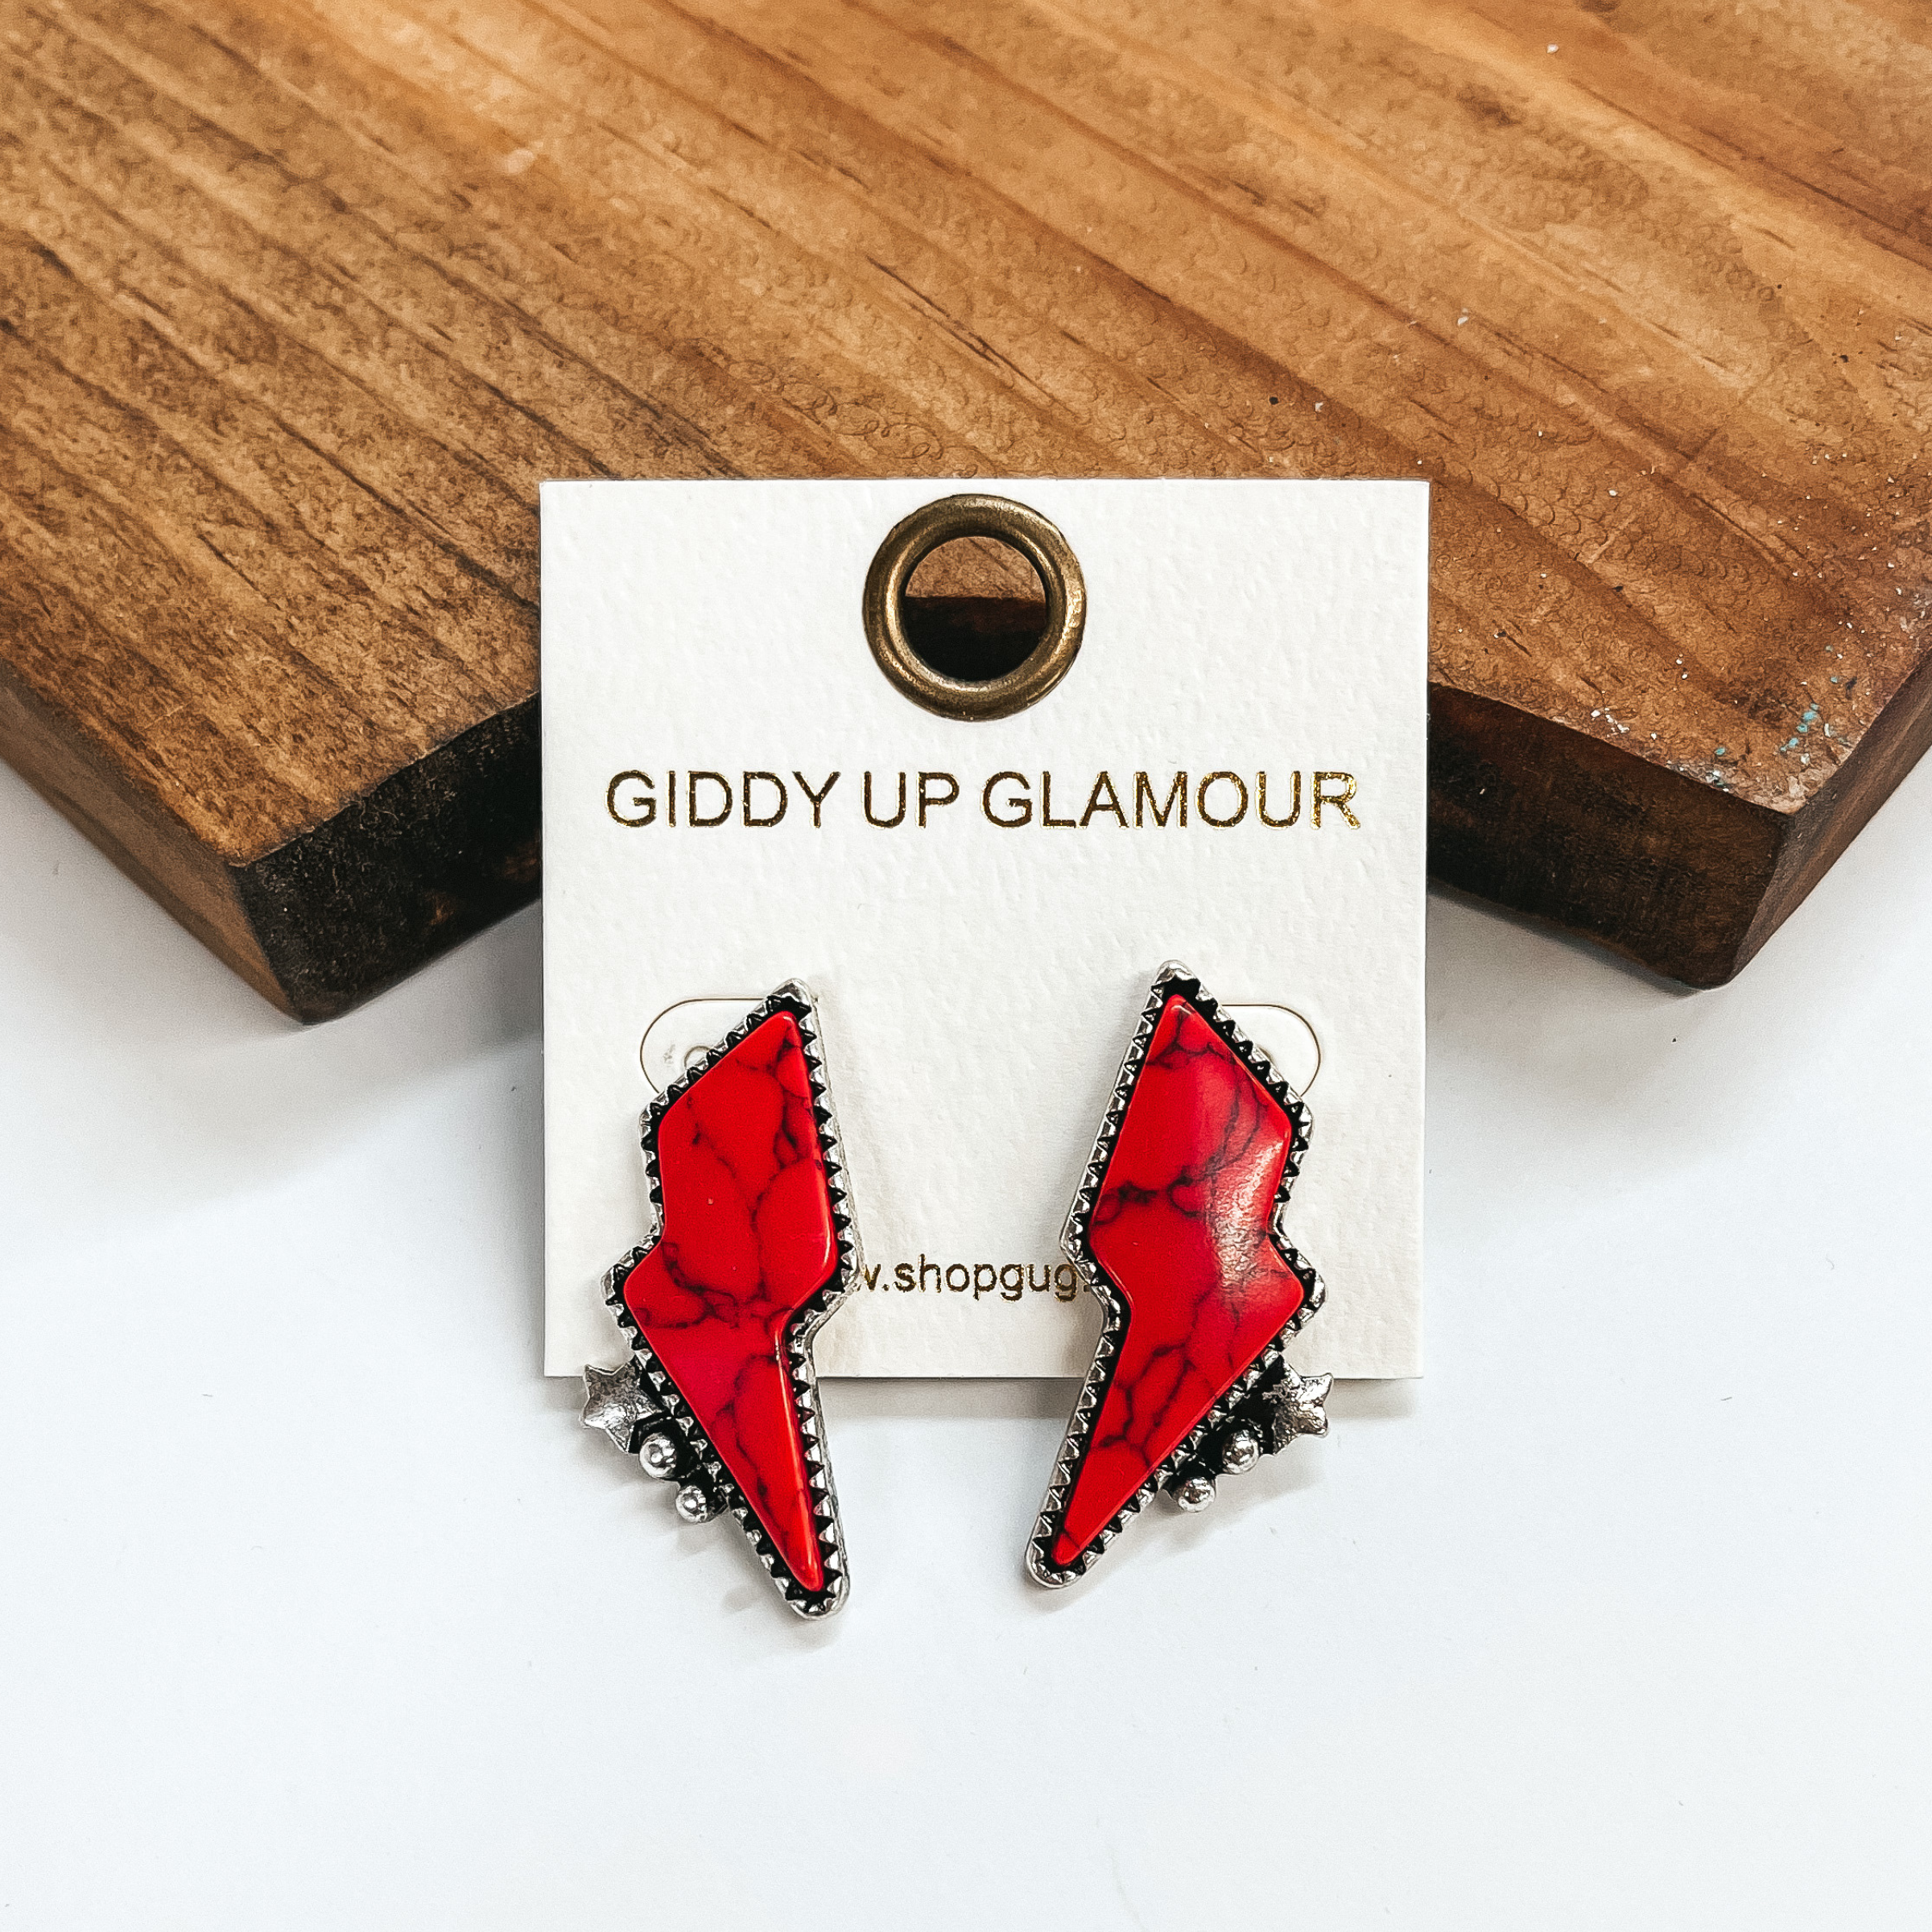 These are red faux stone lightning bolt  post back earrings in a silver setting, they also  have detailing in the bottom; a small star and two  circles. These earrings are taken on leaning up  against a brown block and a white background.